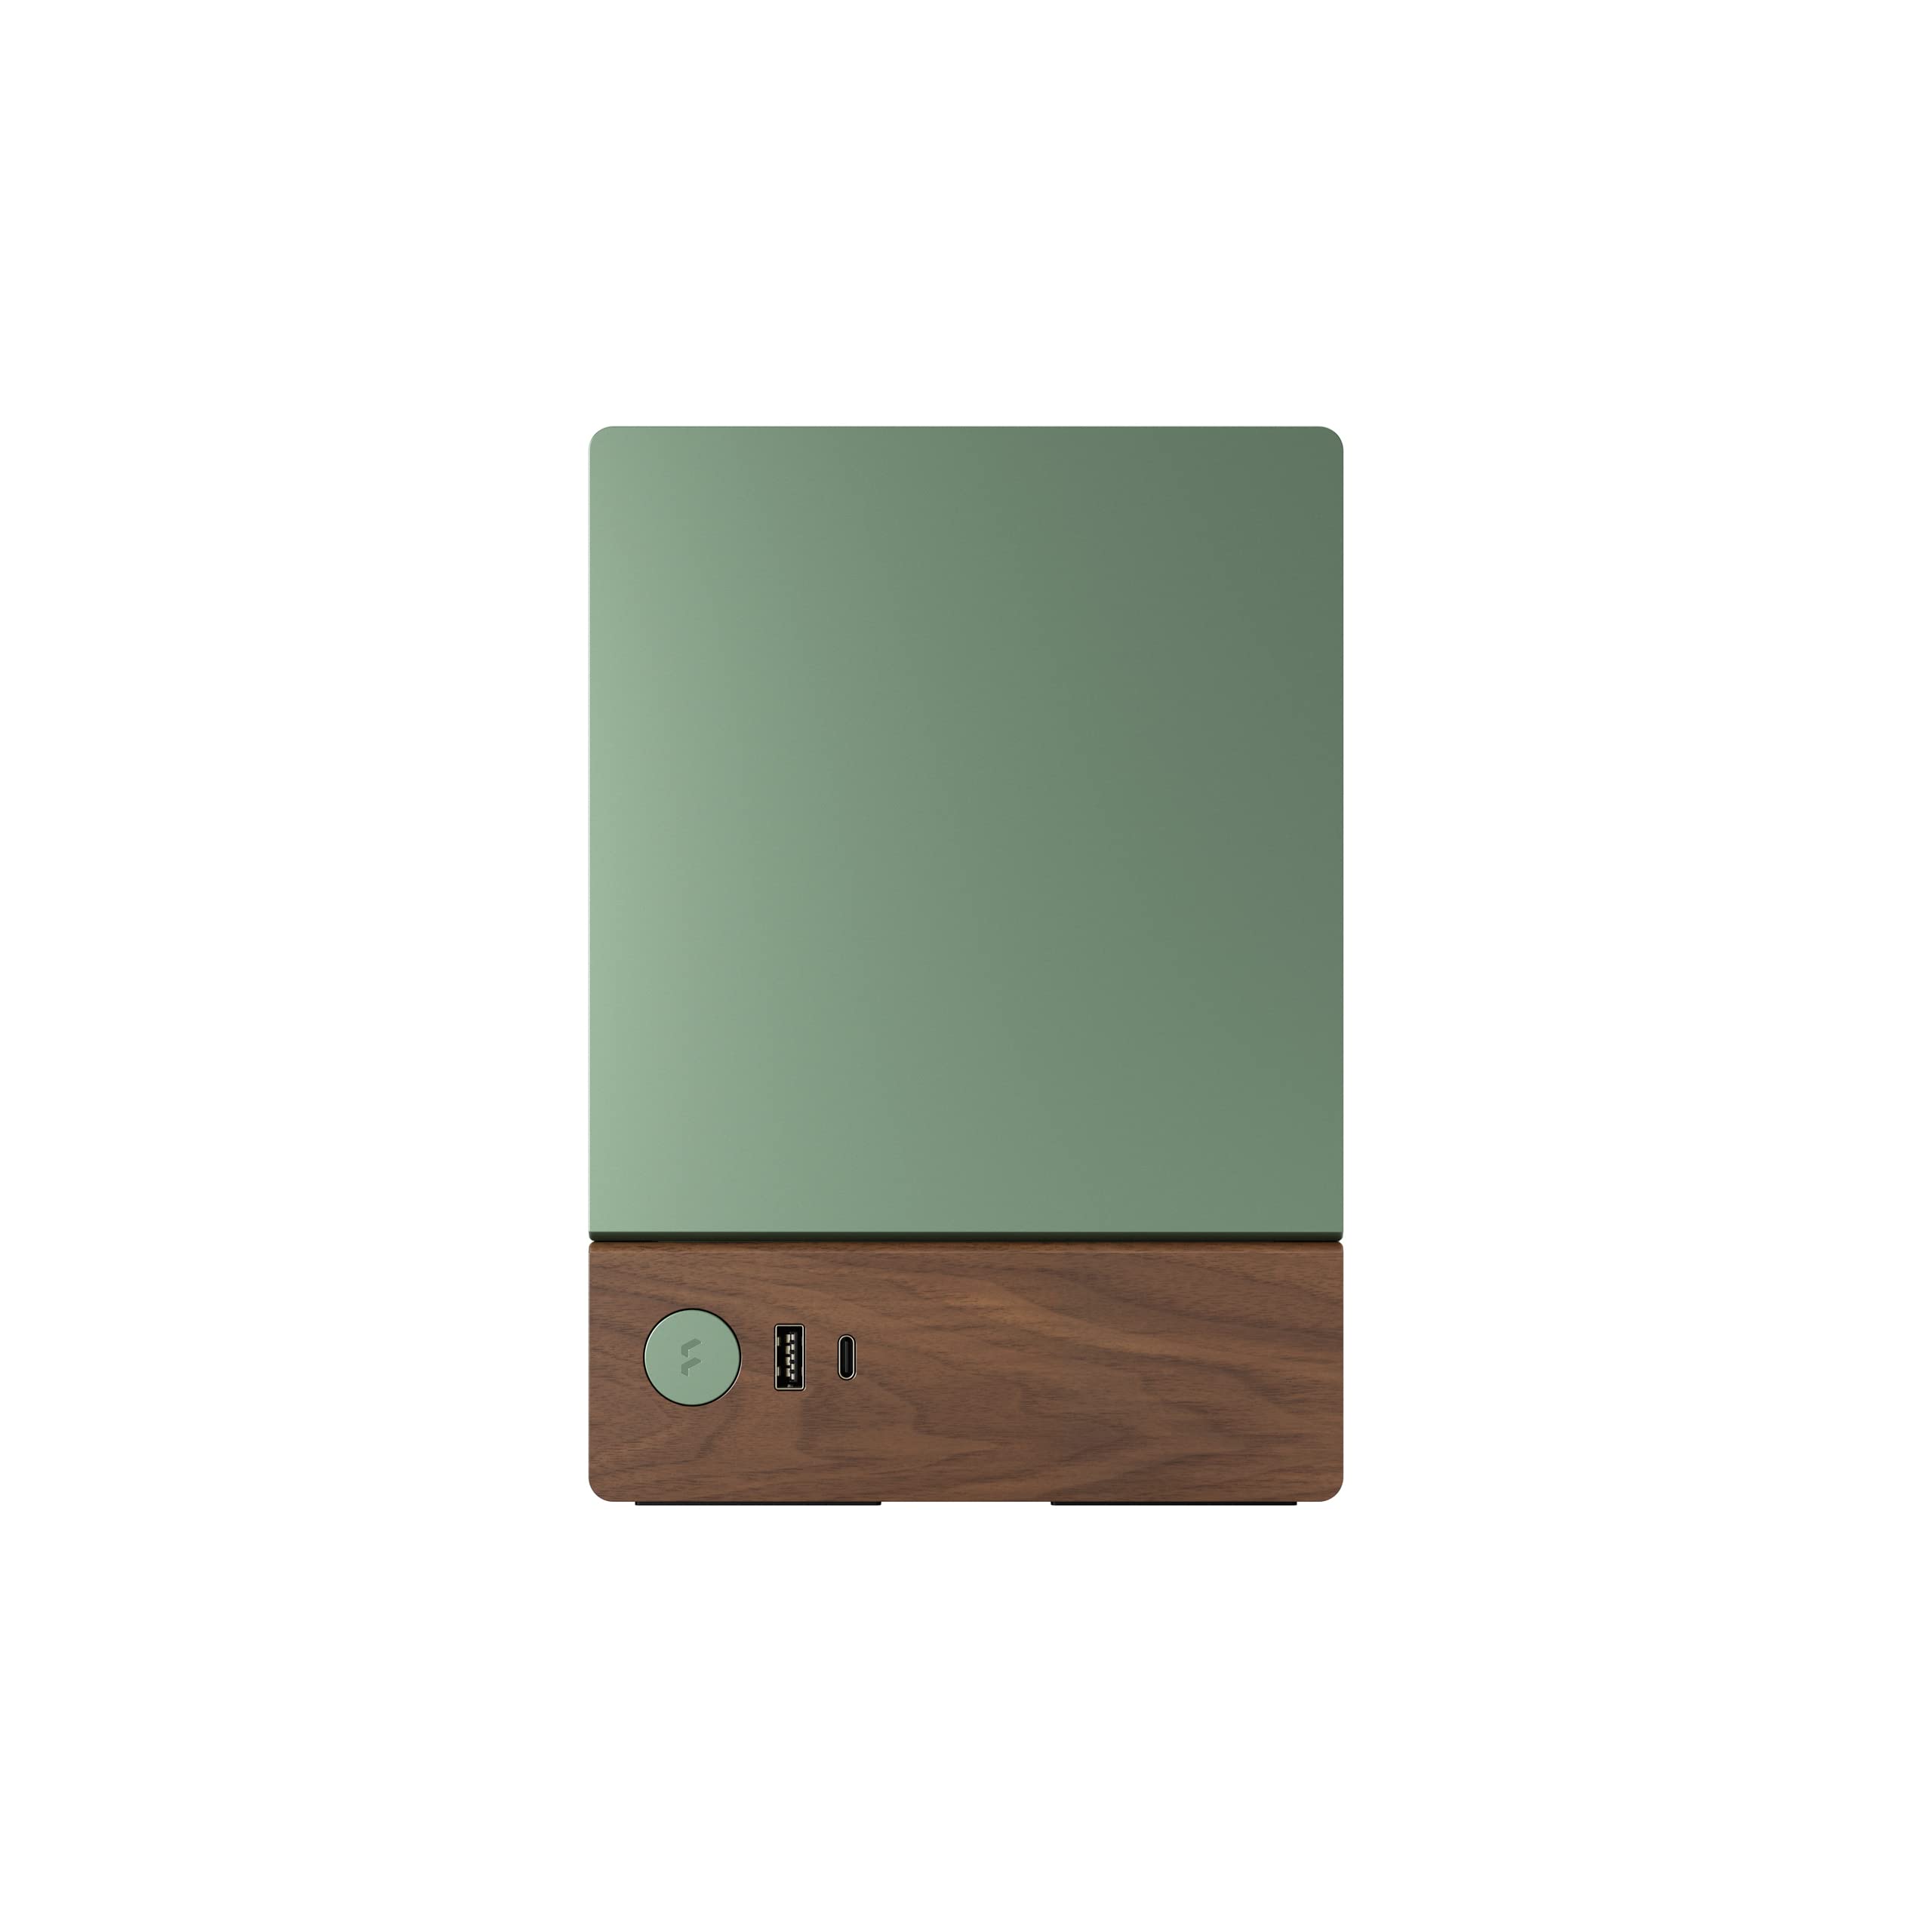 Fractal Design Terra Jade - Wood Walnut Front Panel - Small Form Factor - Mini ITX Gaming case – PCIe 4.0 Riser Cable – USB Type-C - Anodized Aluminum Panels